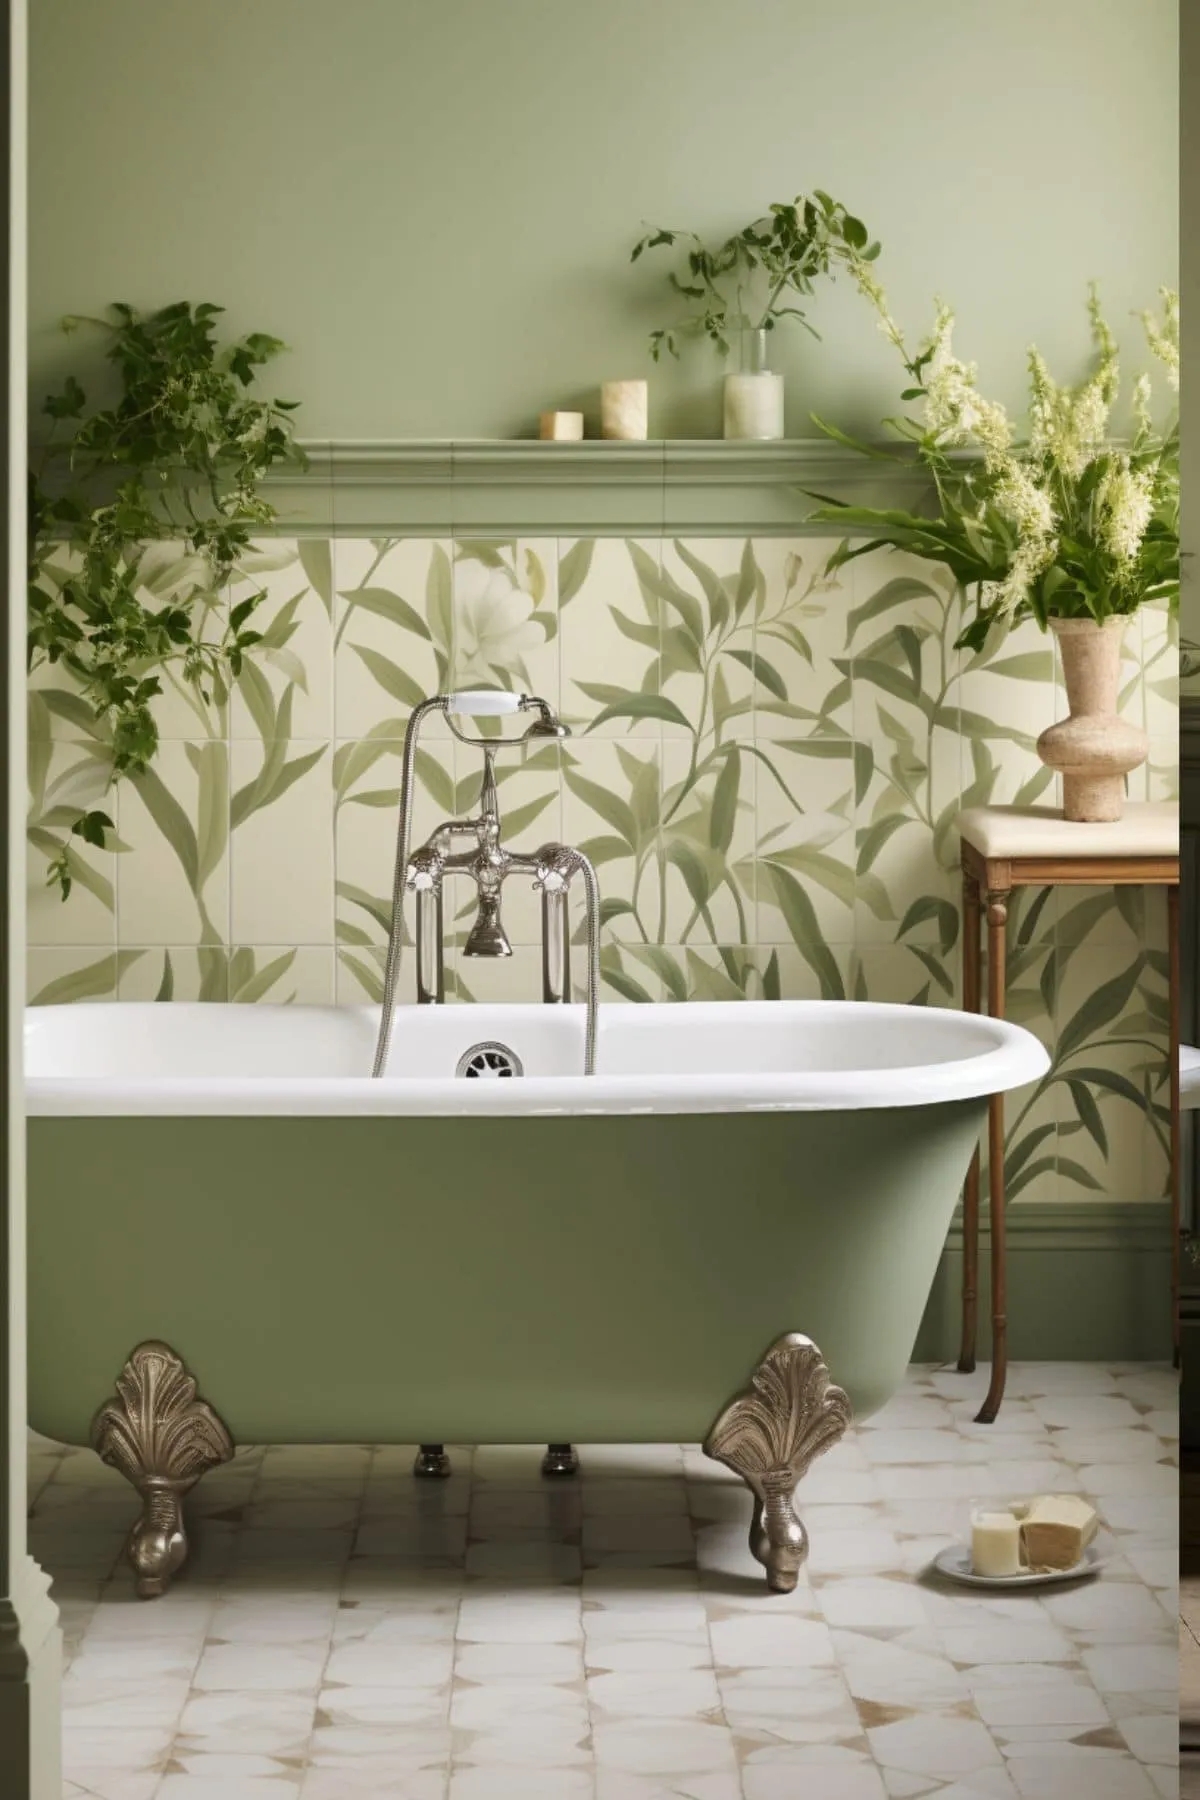 Sage Green Bathroom Design: Turn Your Space Into a Green Oasis